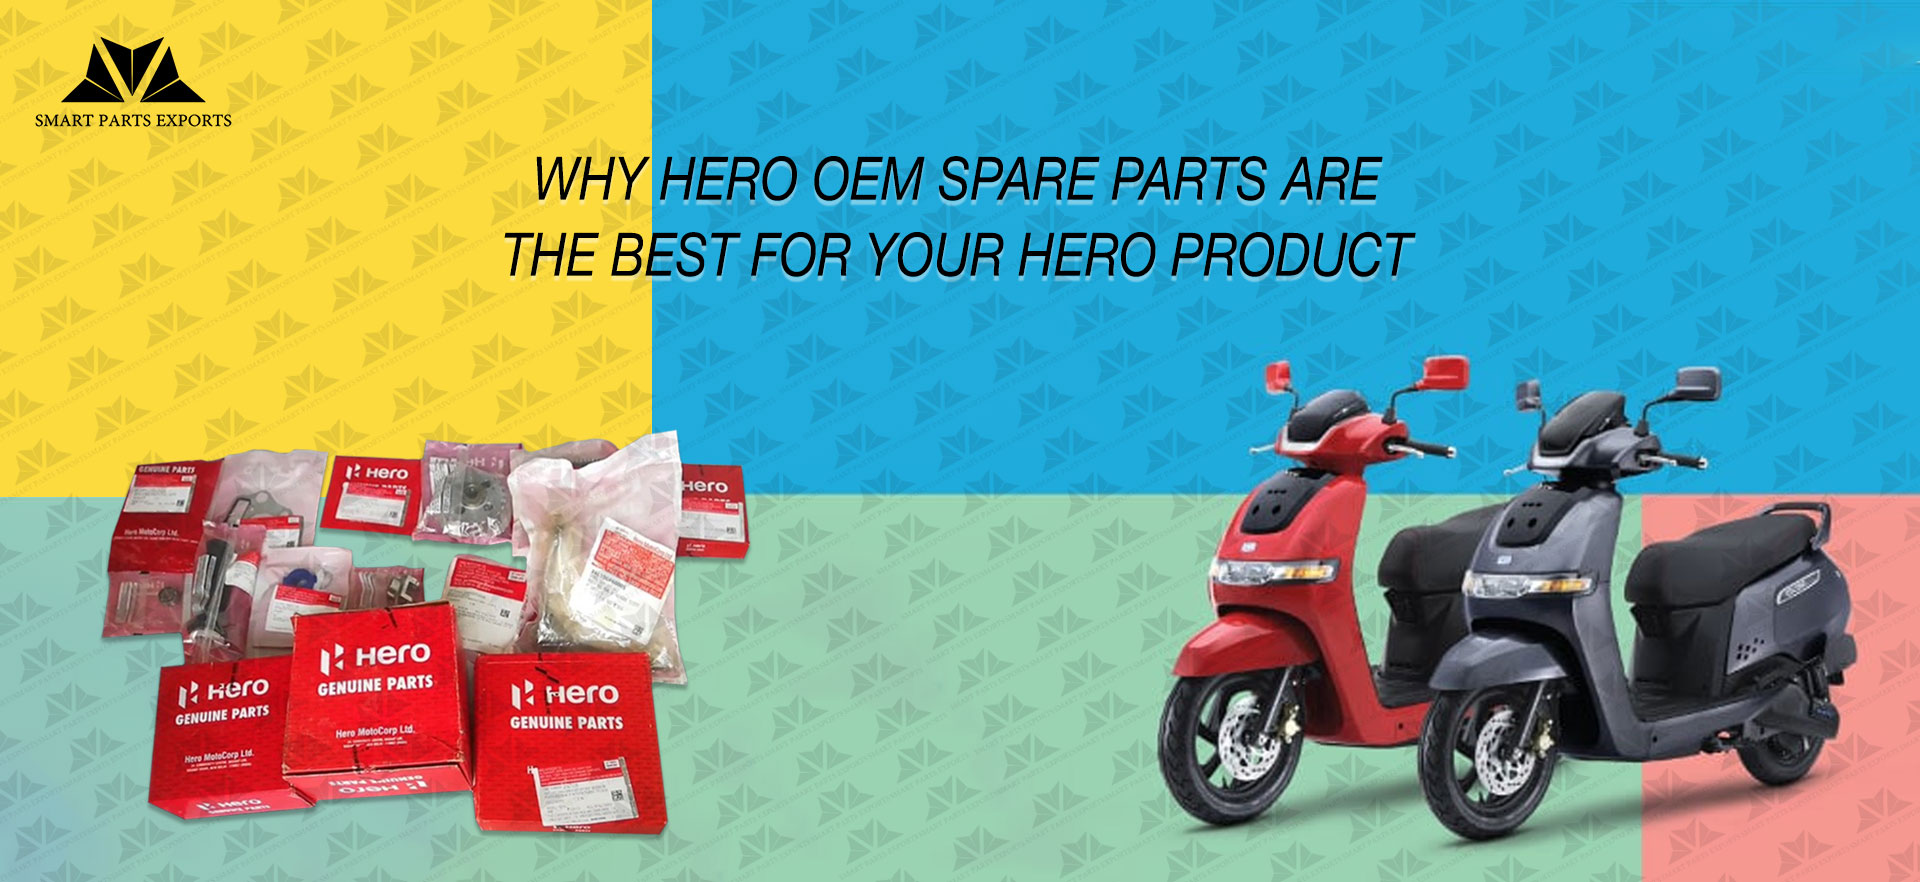 Why Hero OEM Spare parts are the best for your Hero product